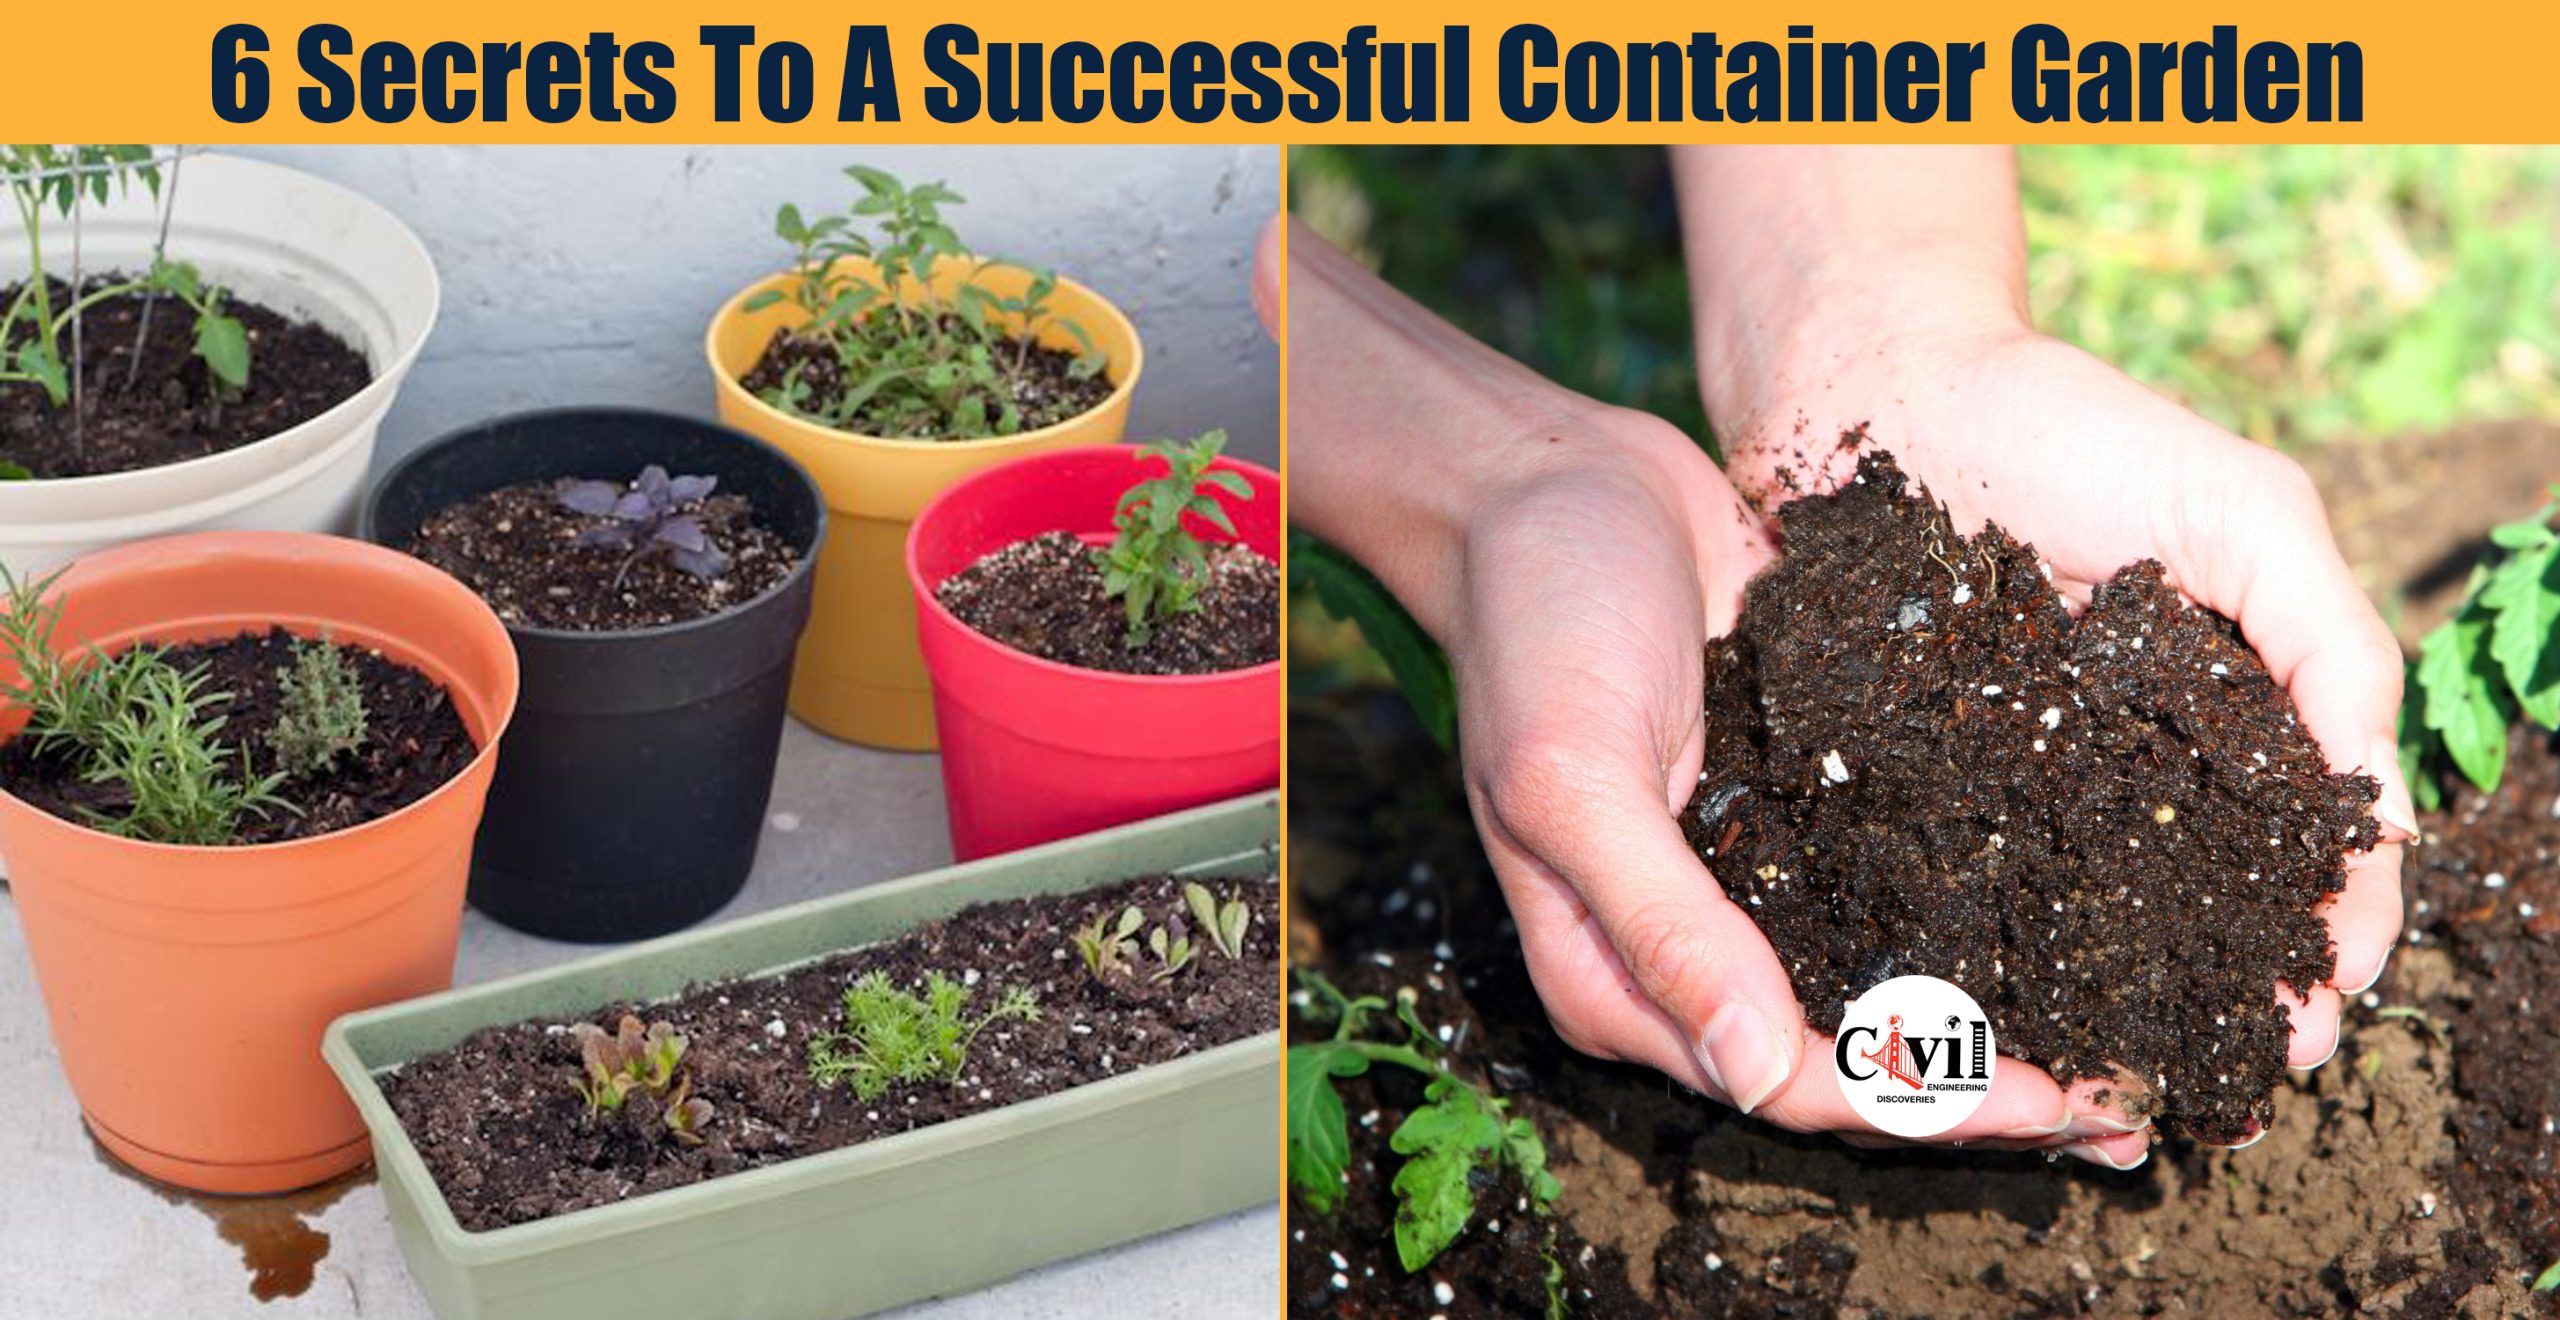 https://engineeringdiscoveries.com/wp-content/uploads/2021/05/6-Secrets-To-A-Successful-Container-Garden-scaled.jpg